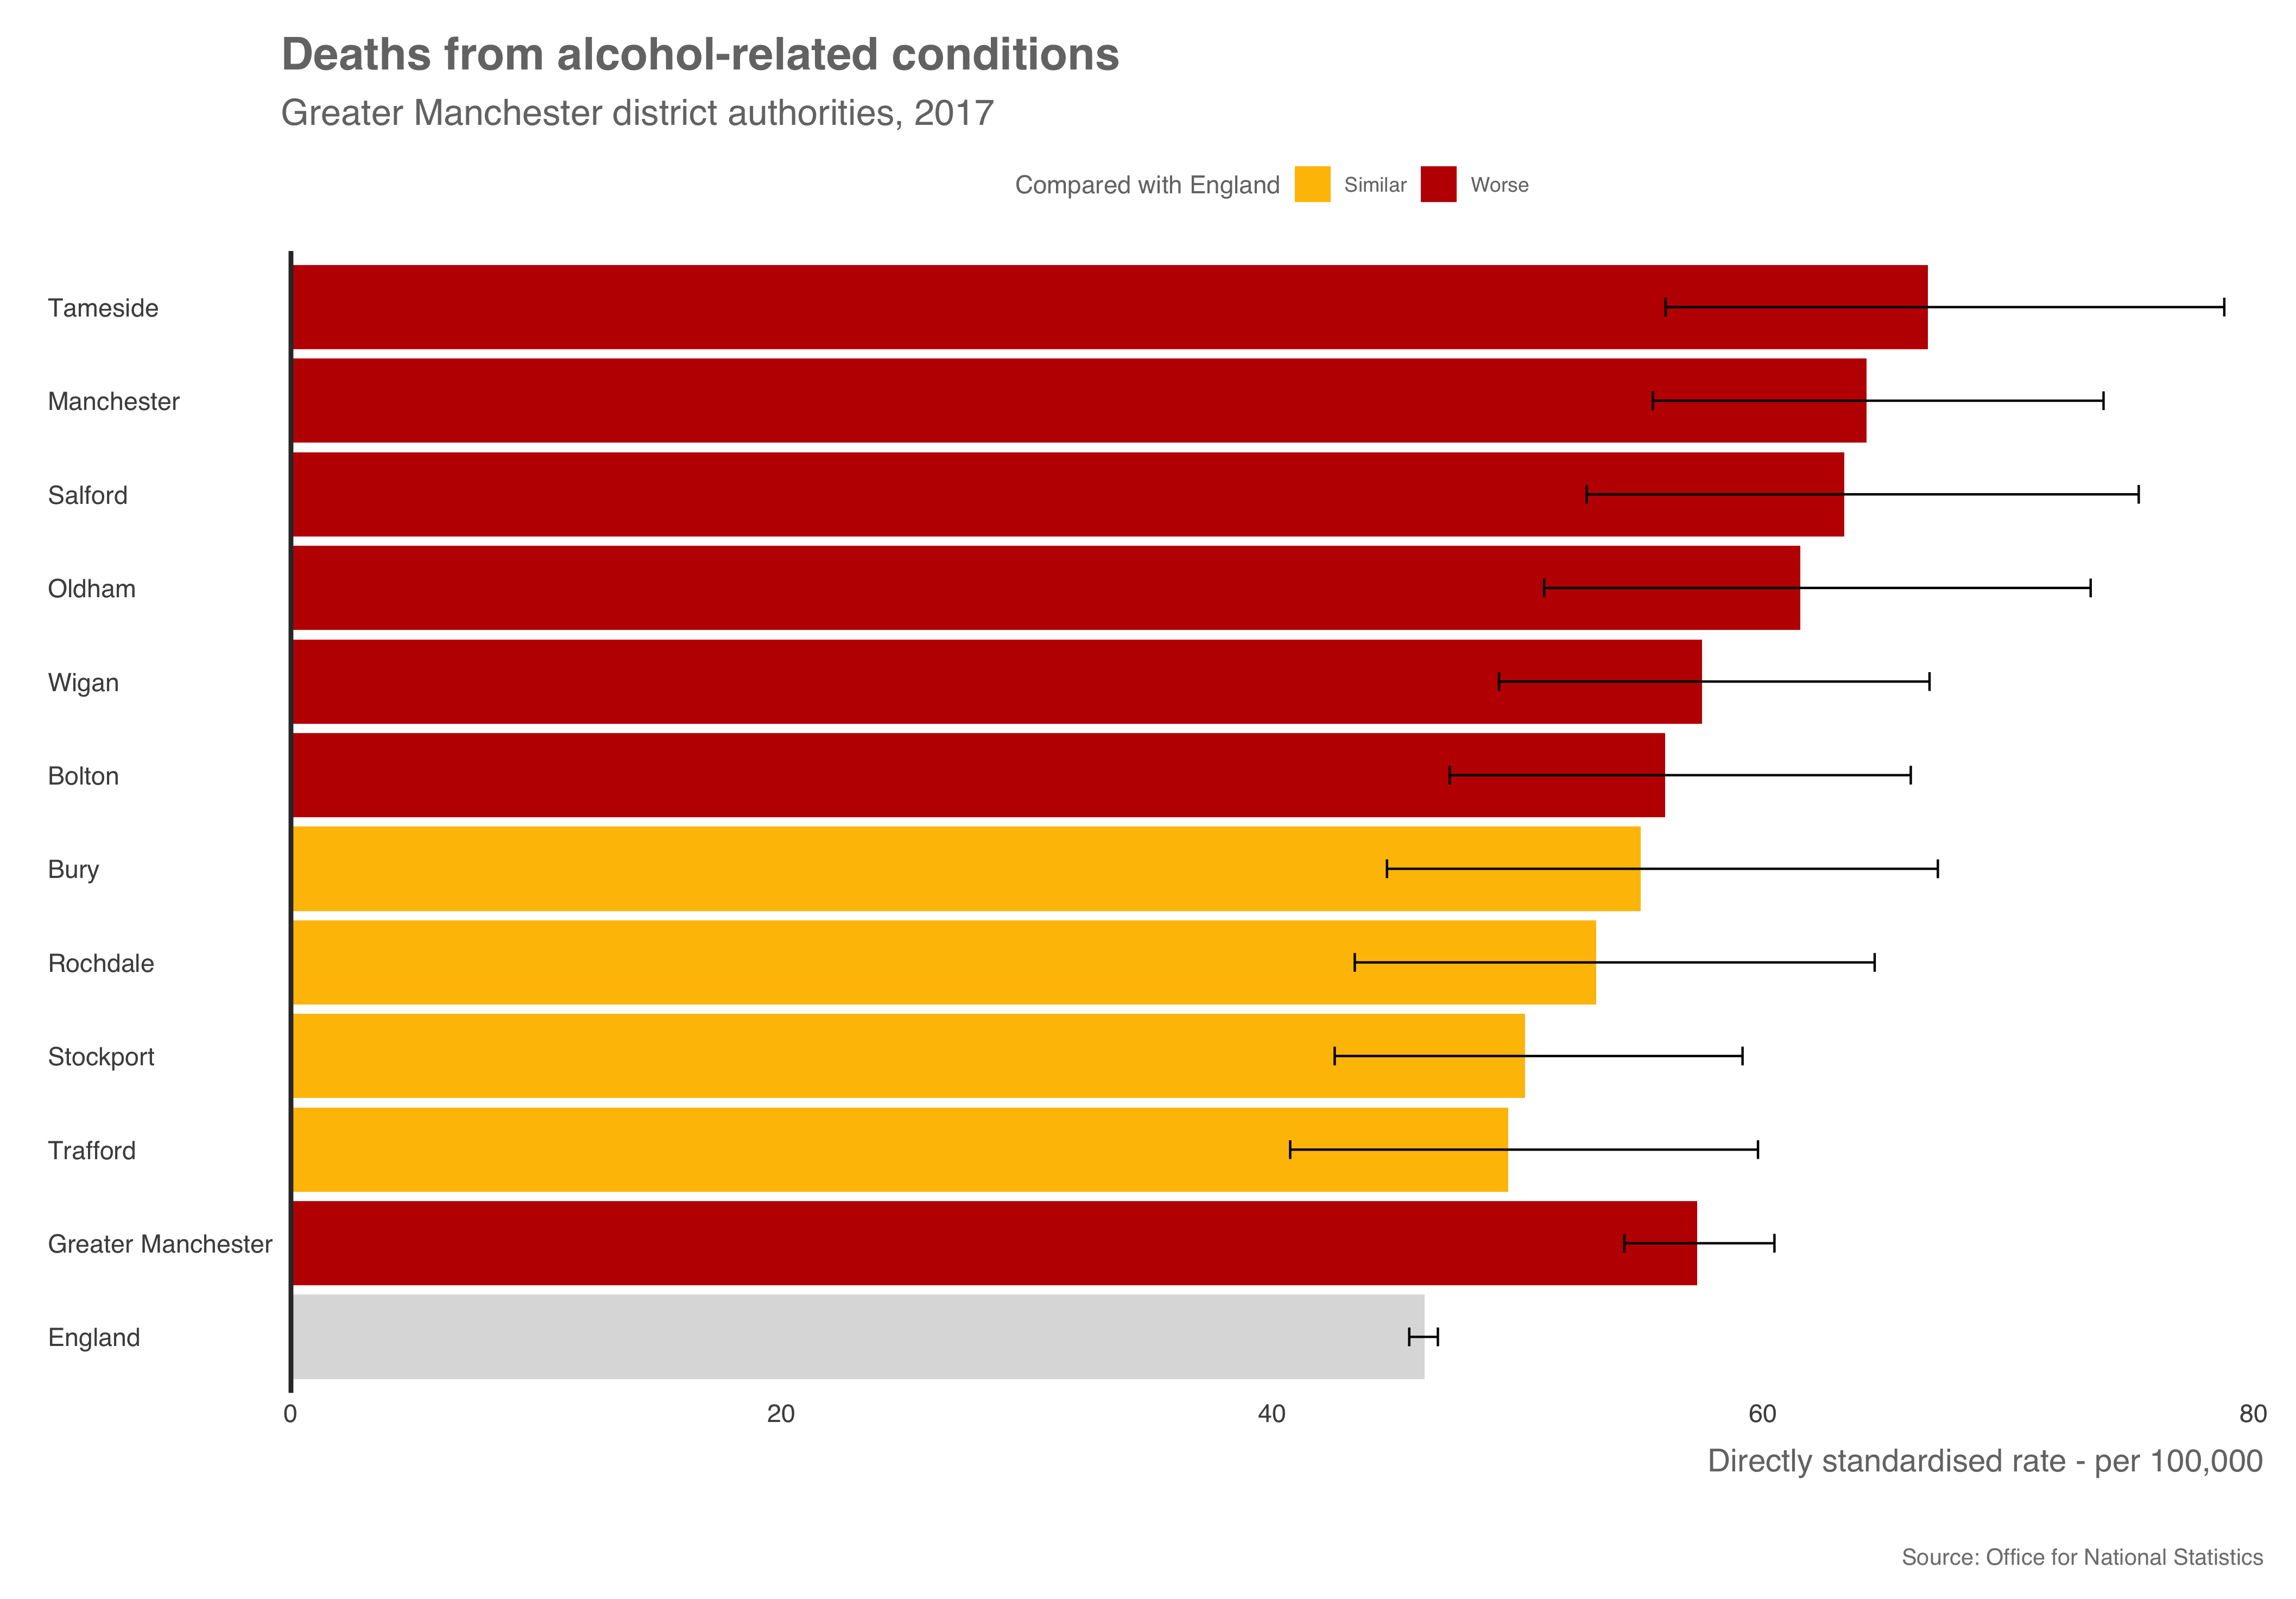 Deaths from alcohol related conditions within each Greater Manchester Local Authority in 2017.